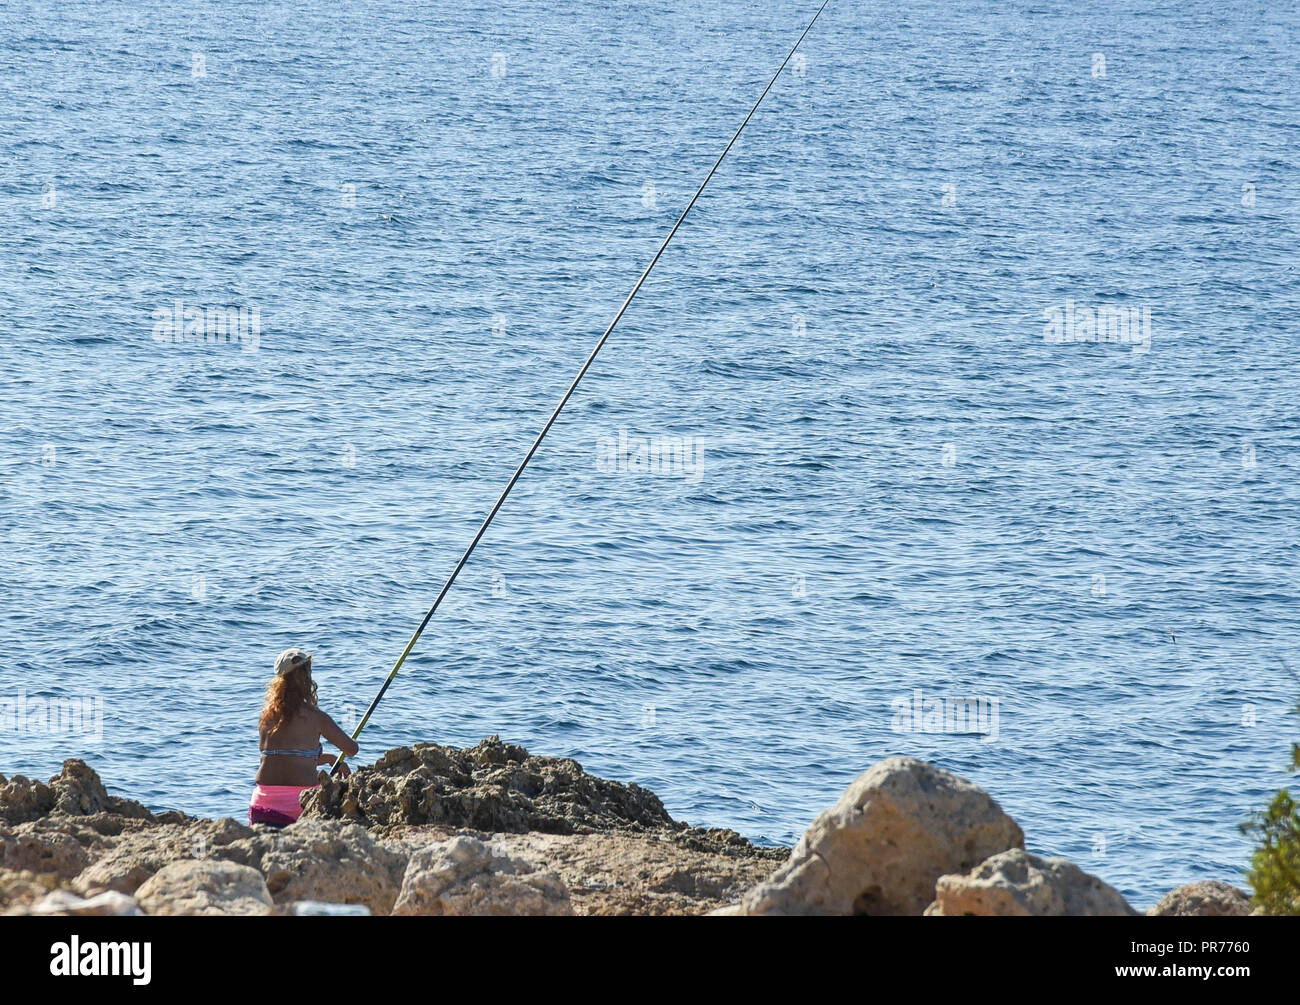 fishing at the seaside Stock Photo